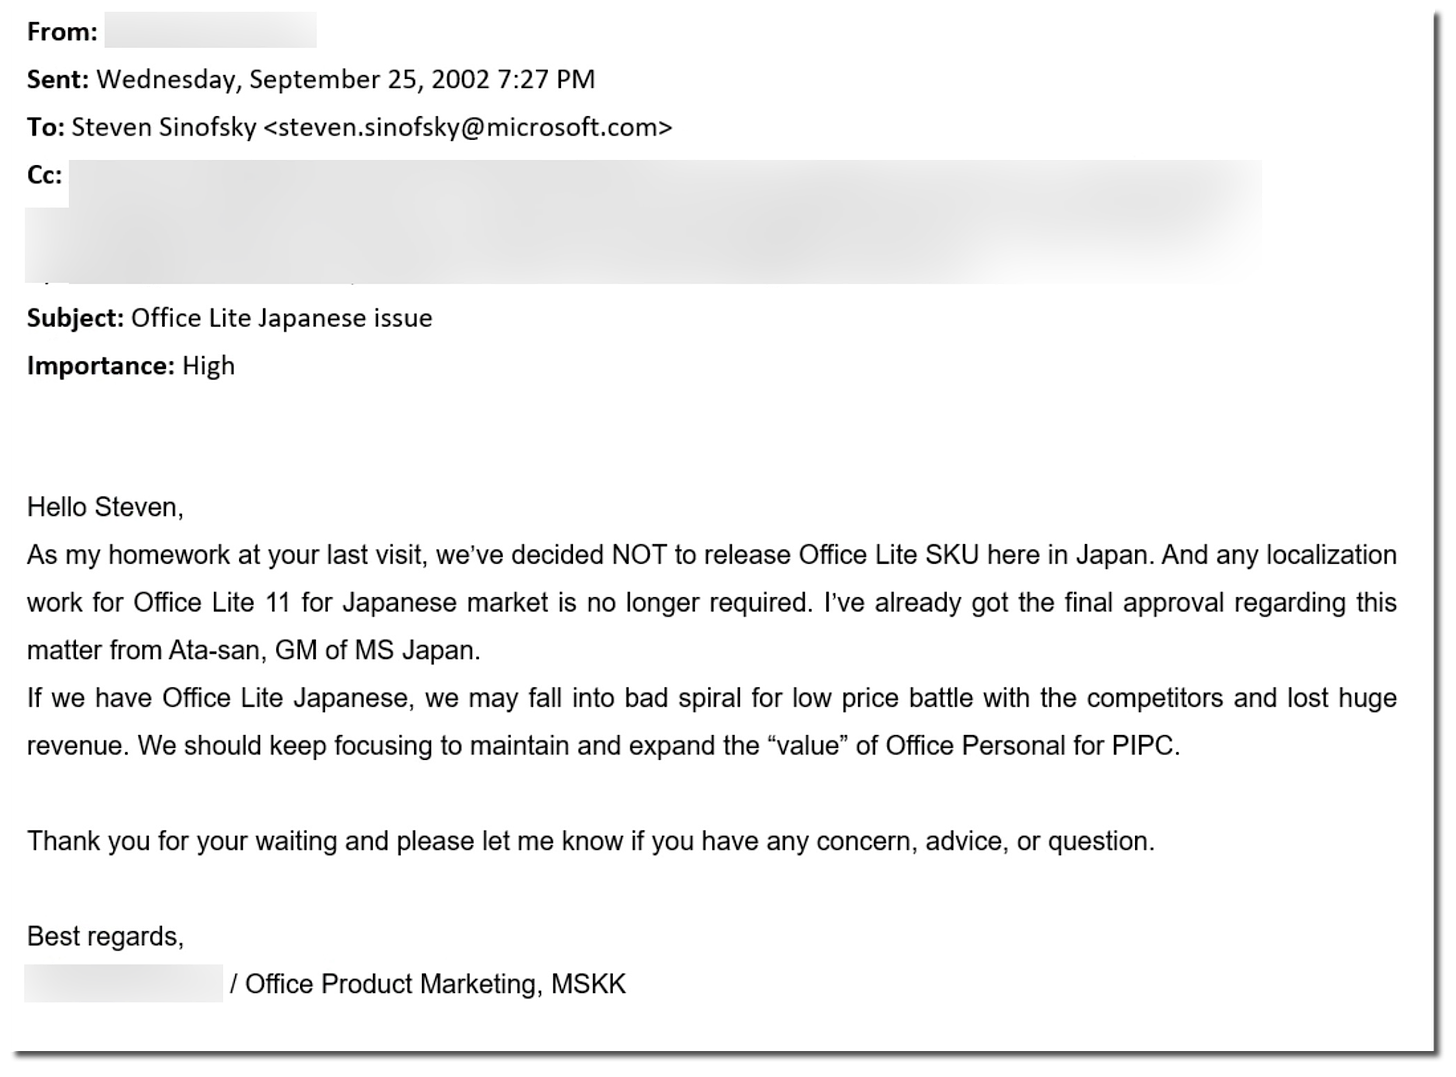 From: Sent: Wednesday, September 25, 2002 7:27 PM To: Steven Sinofsky<steven.sinofsky@microsoft.com> Cc: Subject: Office Lite Japanese issue Importance: High Hello Steven, As my homework at your last visit, we've decided NOT to release Office Lite SKU here in Japan. And any localization work for Office Lite 11 for Japanese market is no longer required. I've already got the final approval regarding this matter from Ata-san, GM of MS Japan. If we have Office Lite Japanese, we may fall into bad spiral for low price battle with the competitors and lost huge revenue. We should keep focusing to maintain and expand the "value" of Office Personal for PIPC Thank you for your waiting and please let me know if you have any concern, advice, or question. Best regards, / Office Product Marketing, MSKK